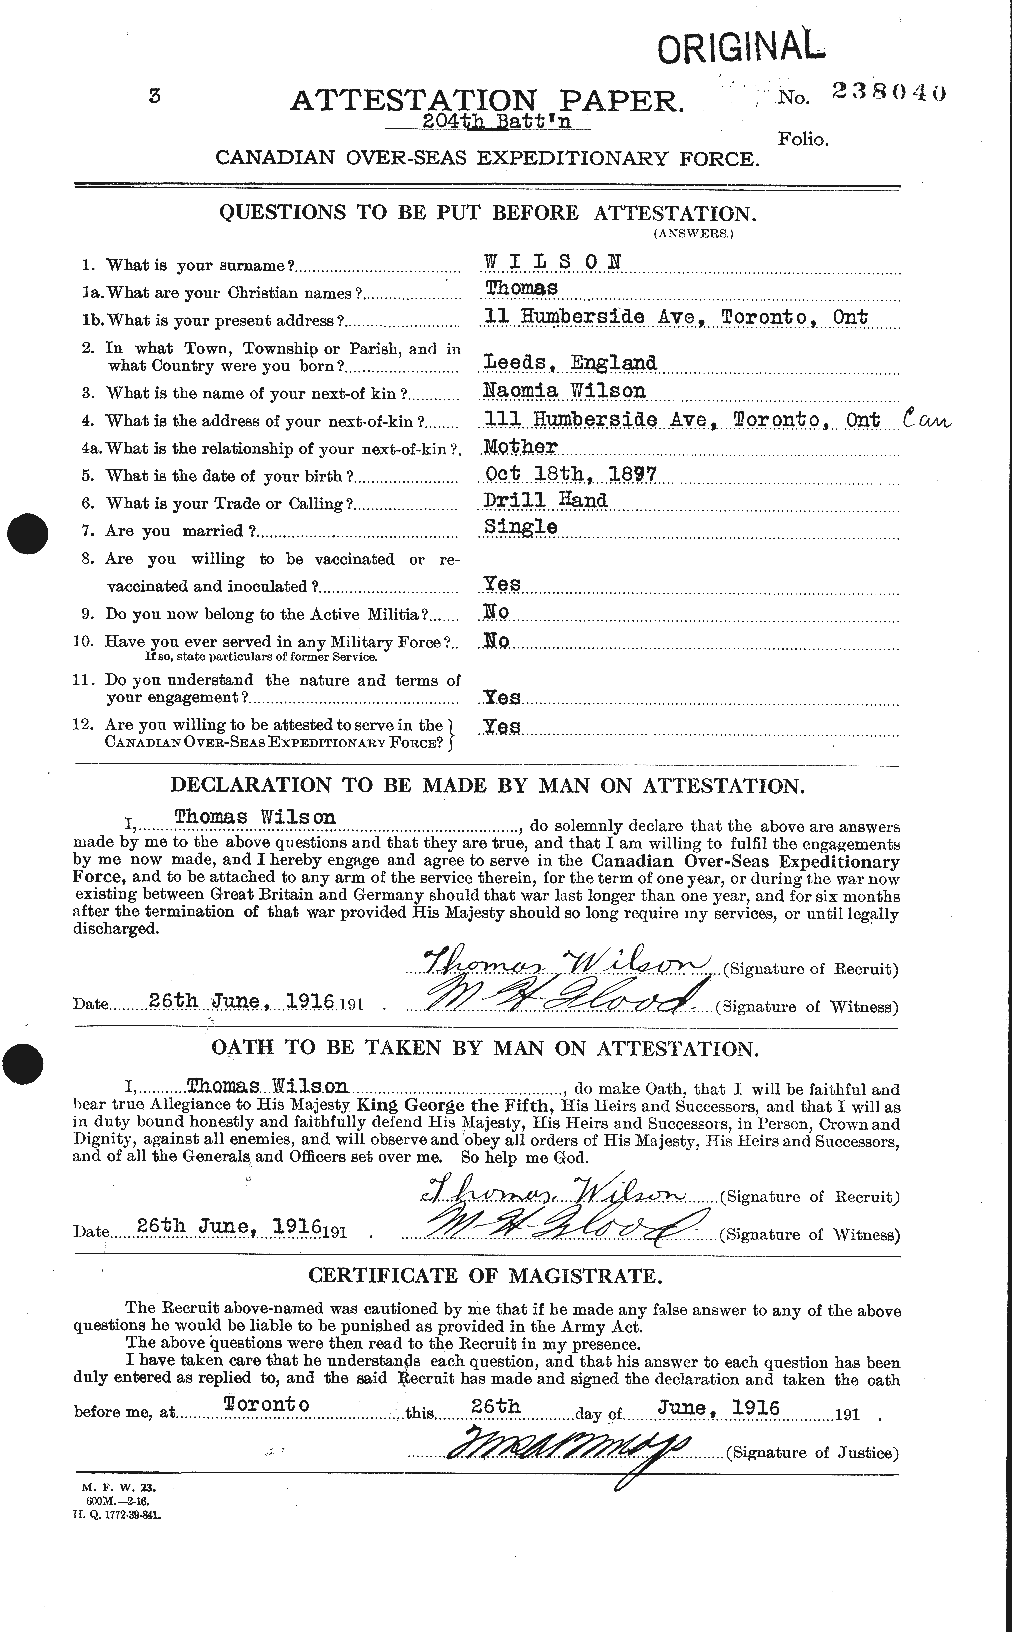 Personnel Records of the First World War - CEF 681179a